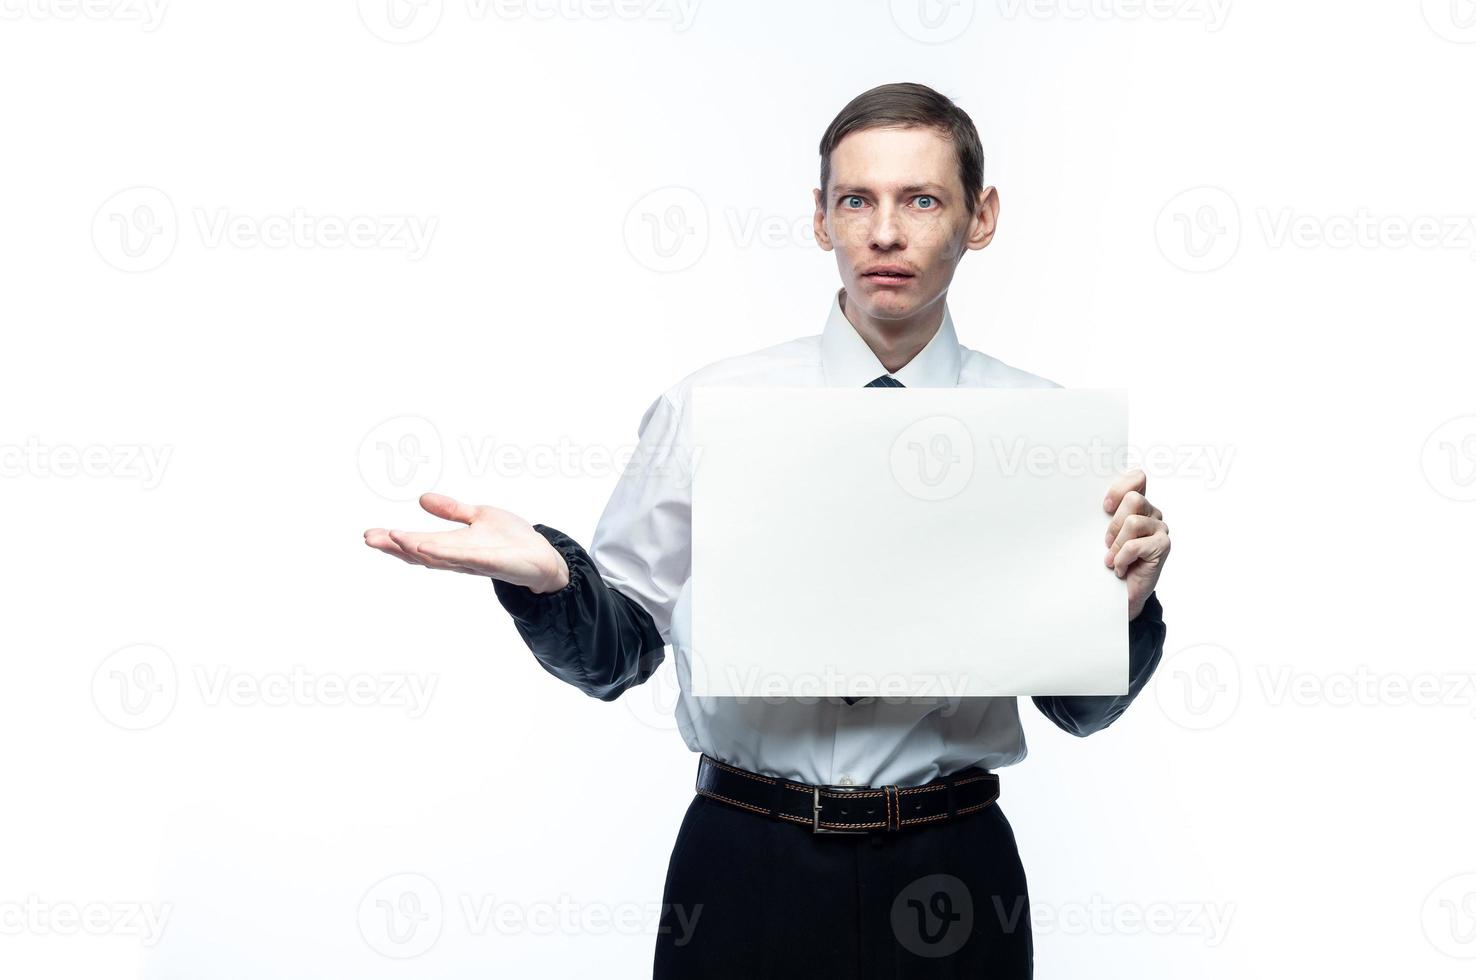 Business man with a piece of paper in his hands on a white, isolated background photo